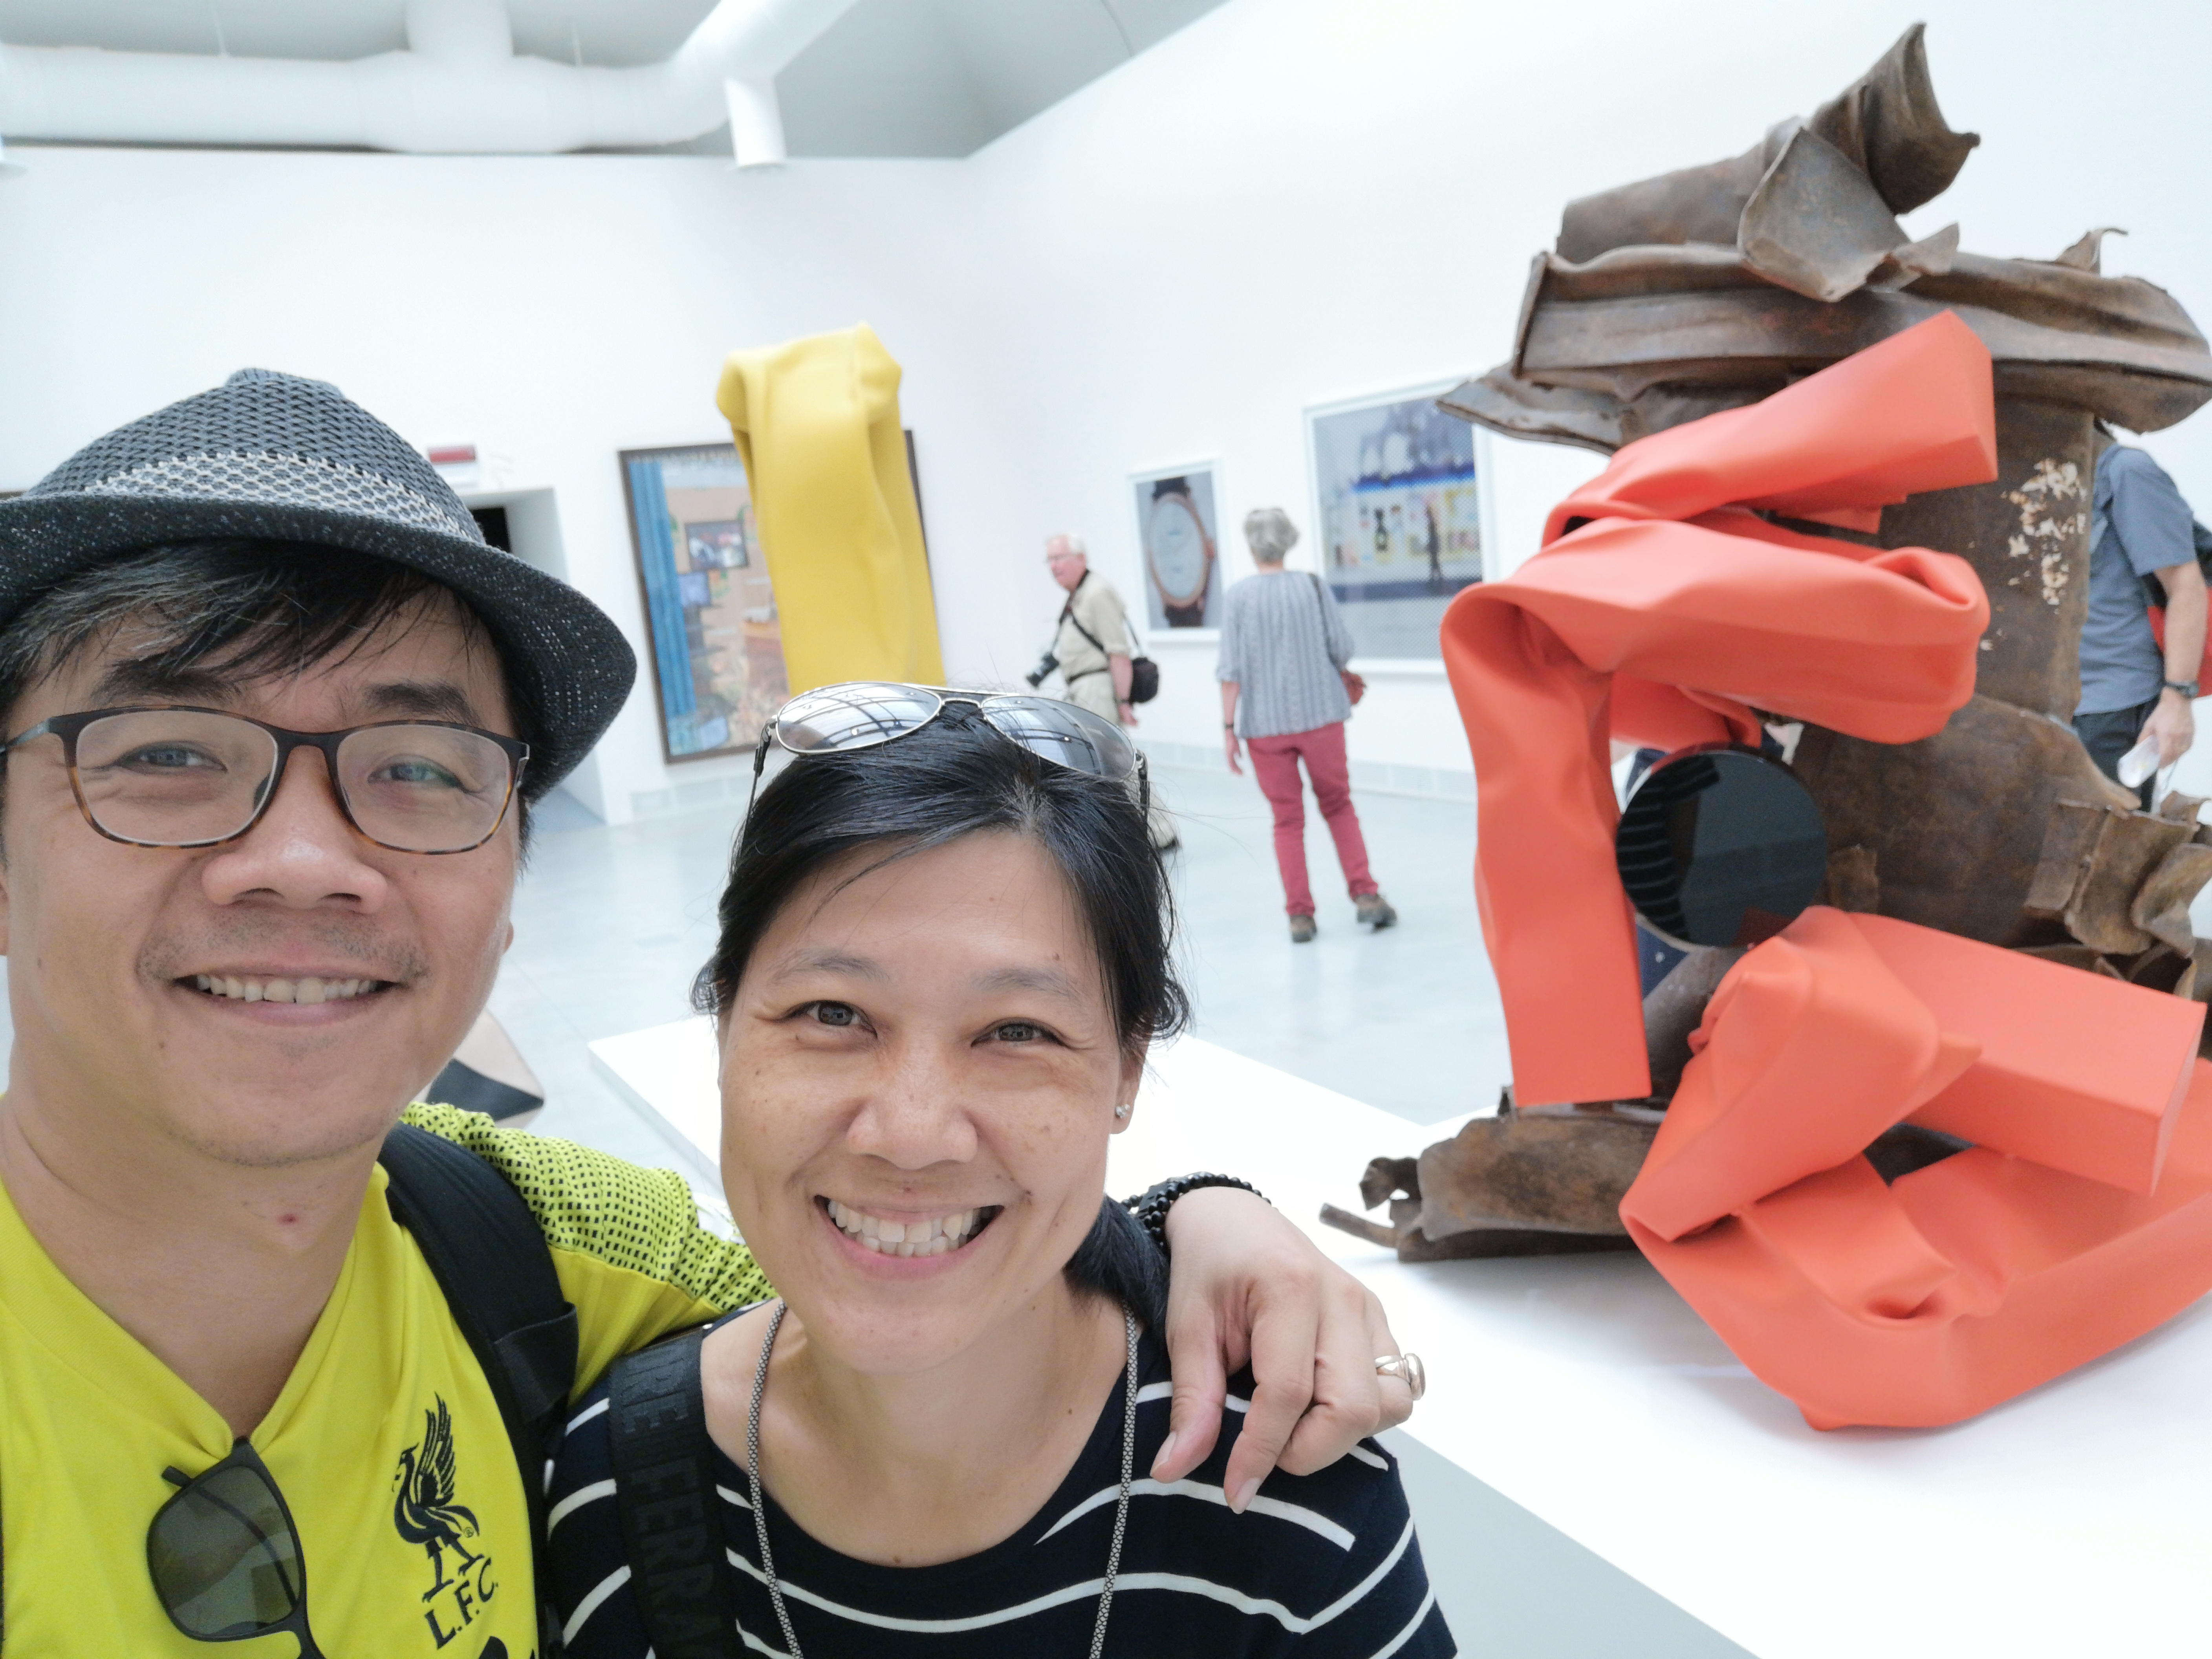 Howie and his wife, Teresa, at the Venice Biennale 2019.